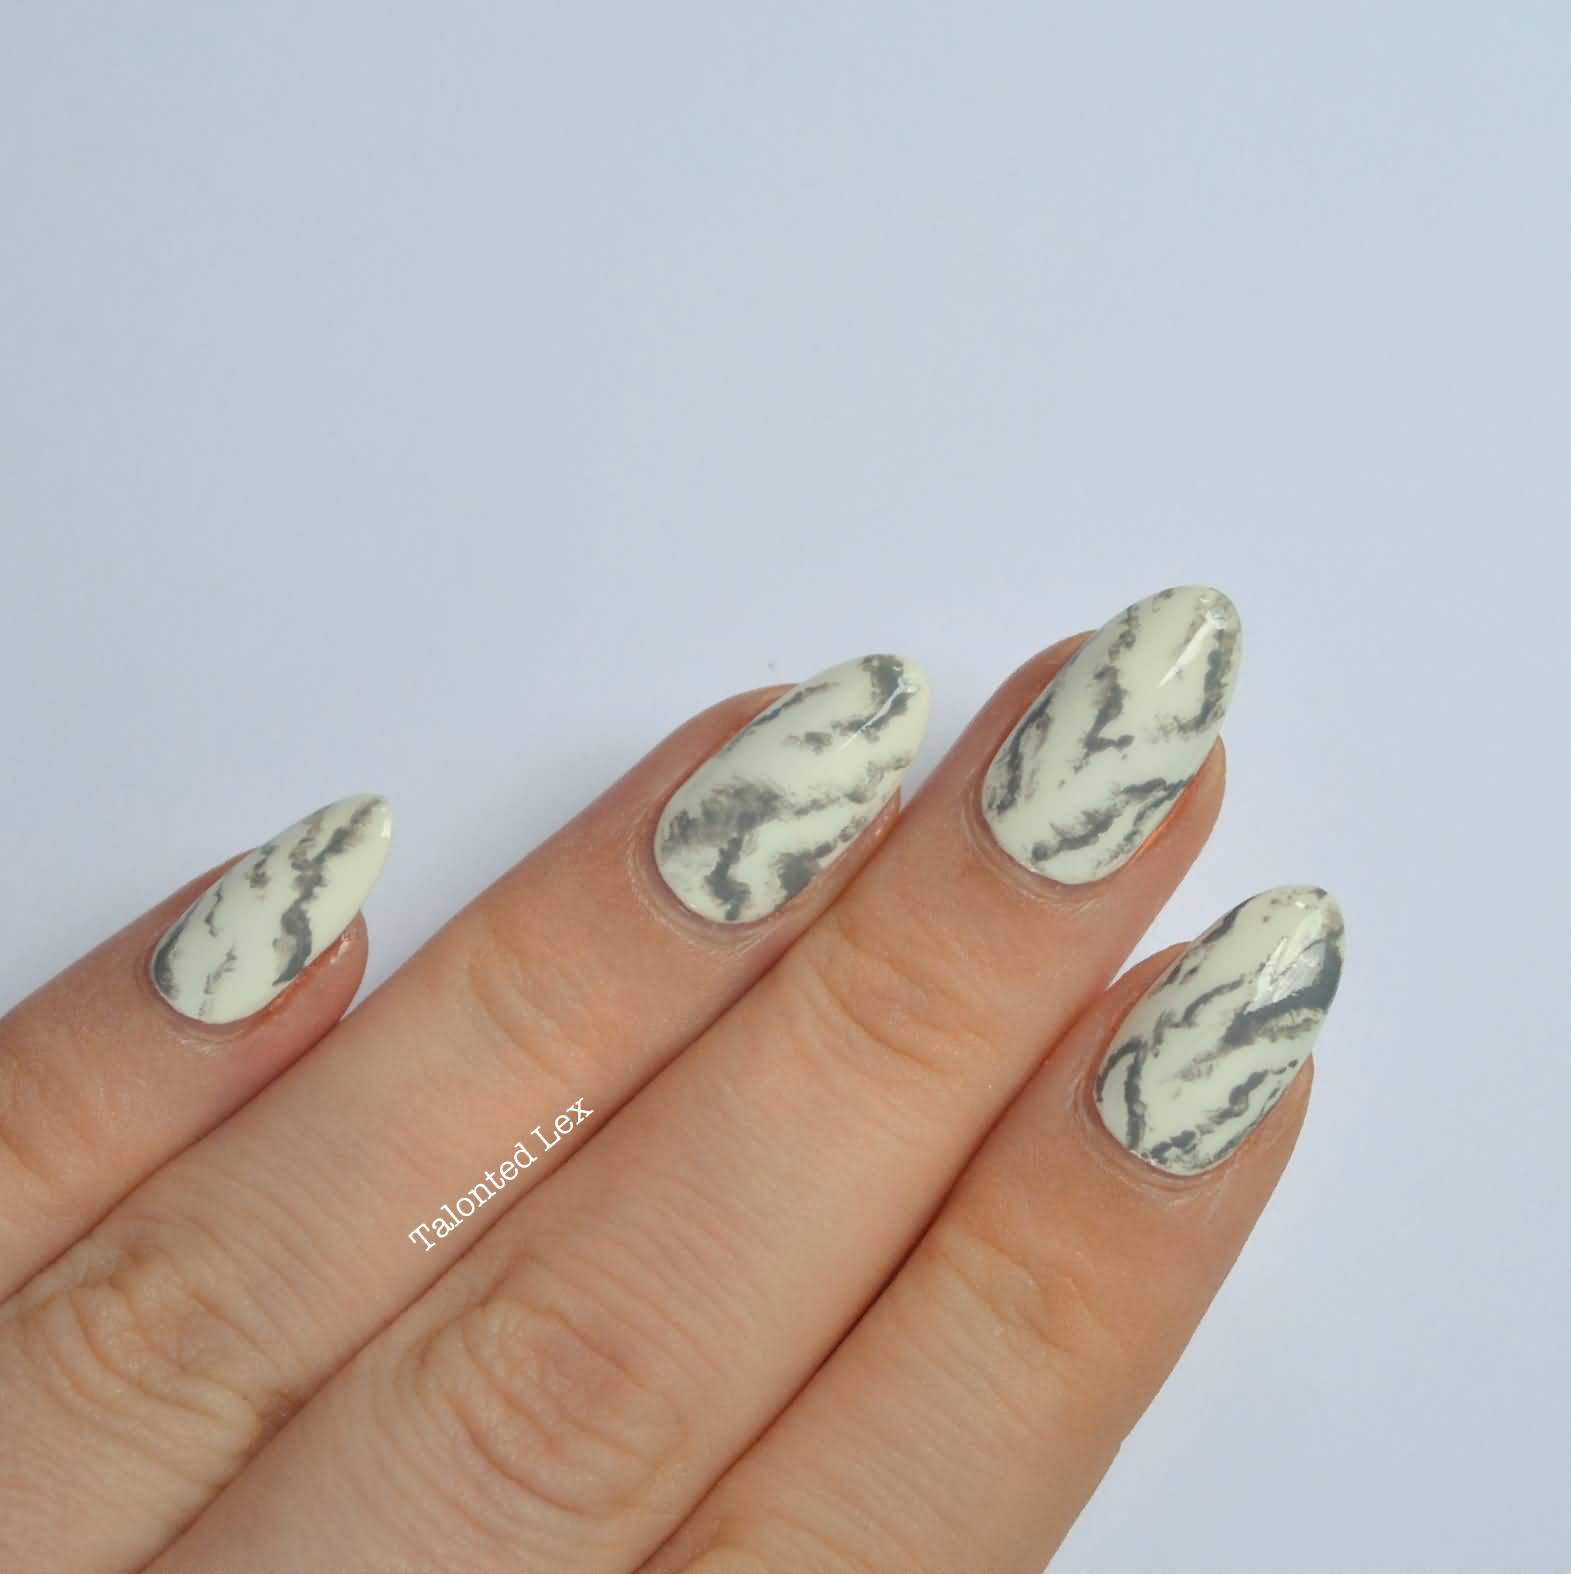 White And Grey Almond Shaped Marble Nail Art